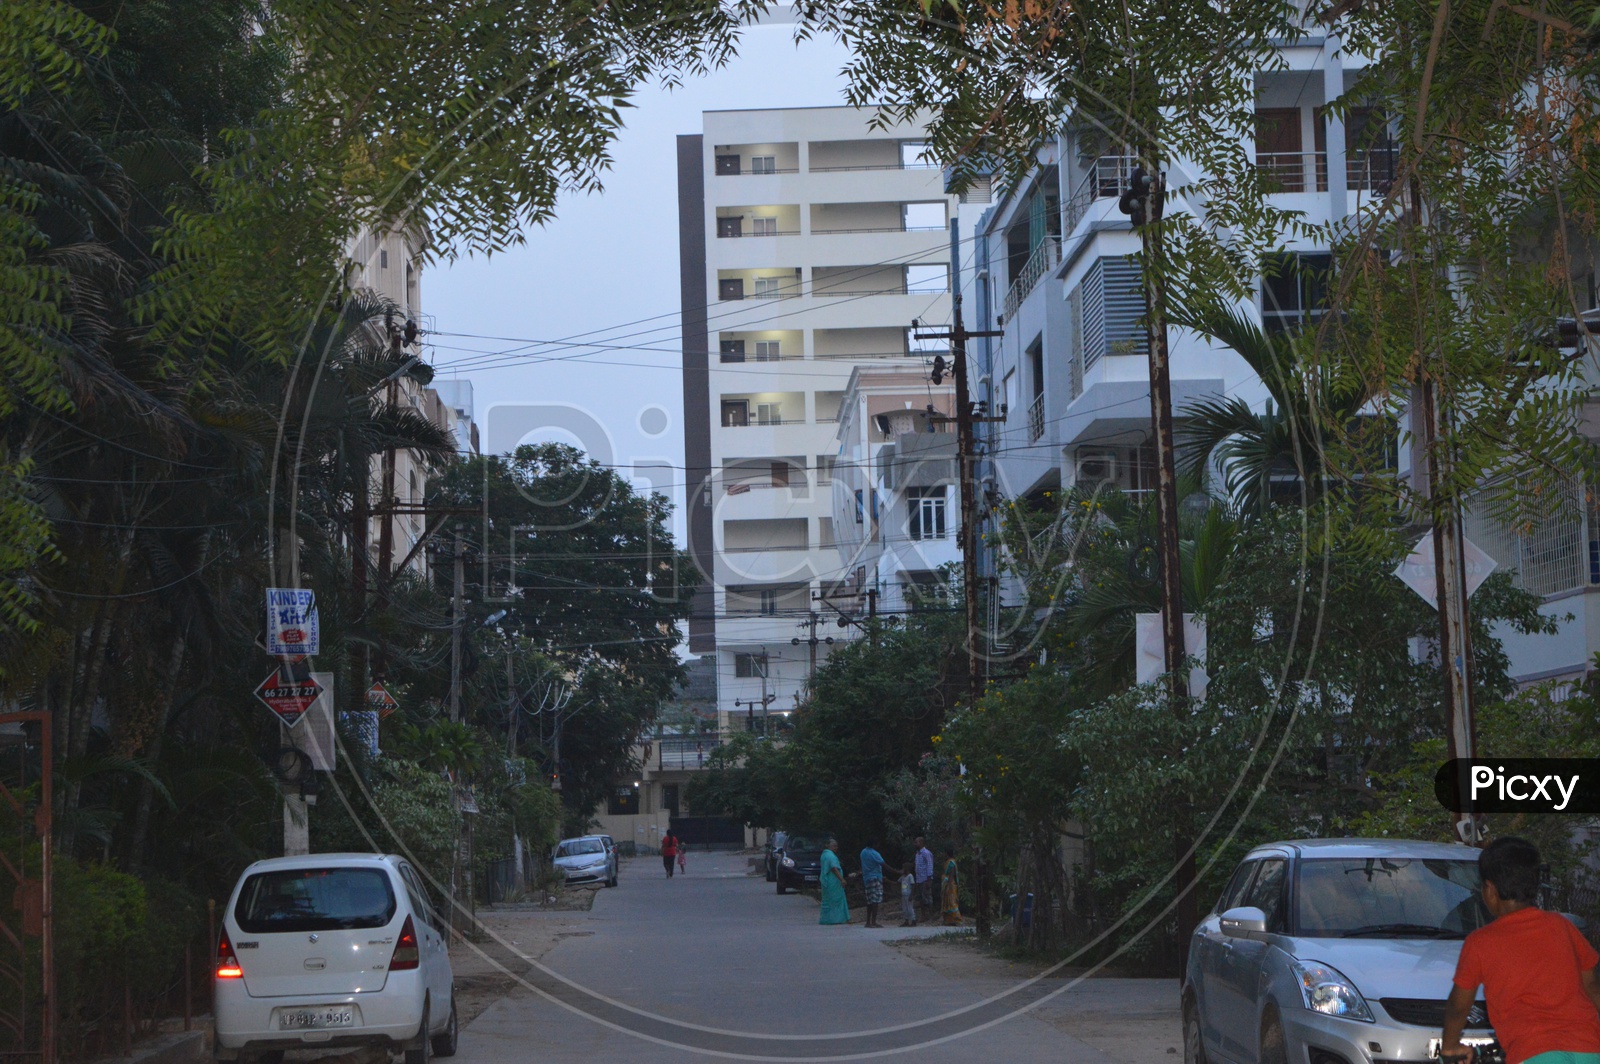 Streets Or Roads in a Residential Area or Colony